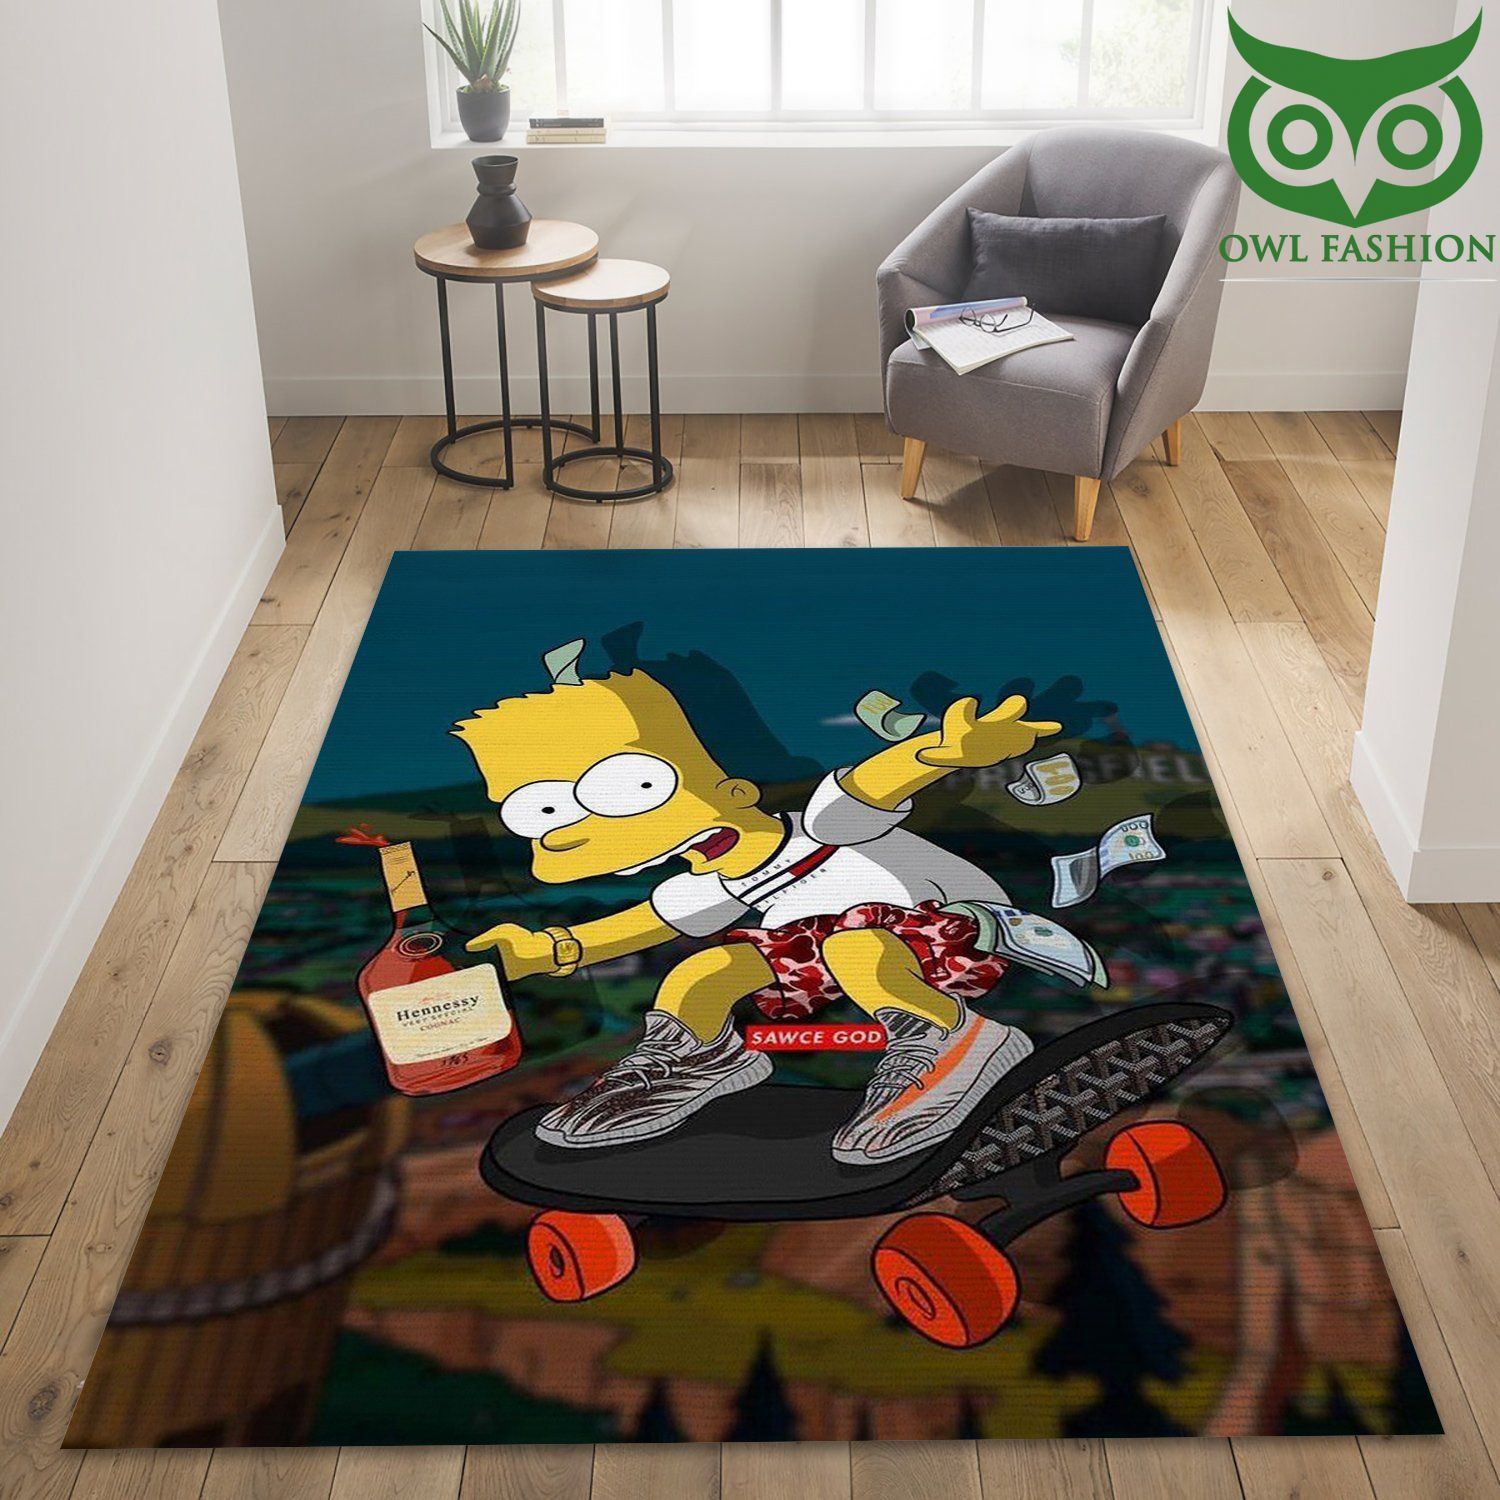 Bape style carpet rug Home and floor Decoration